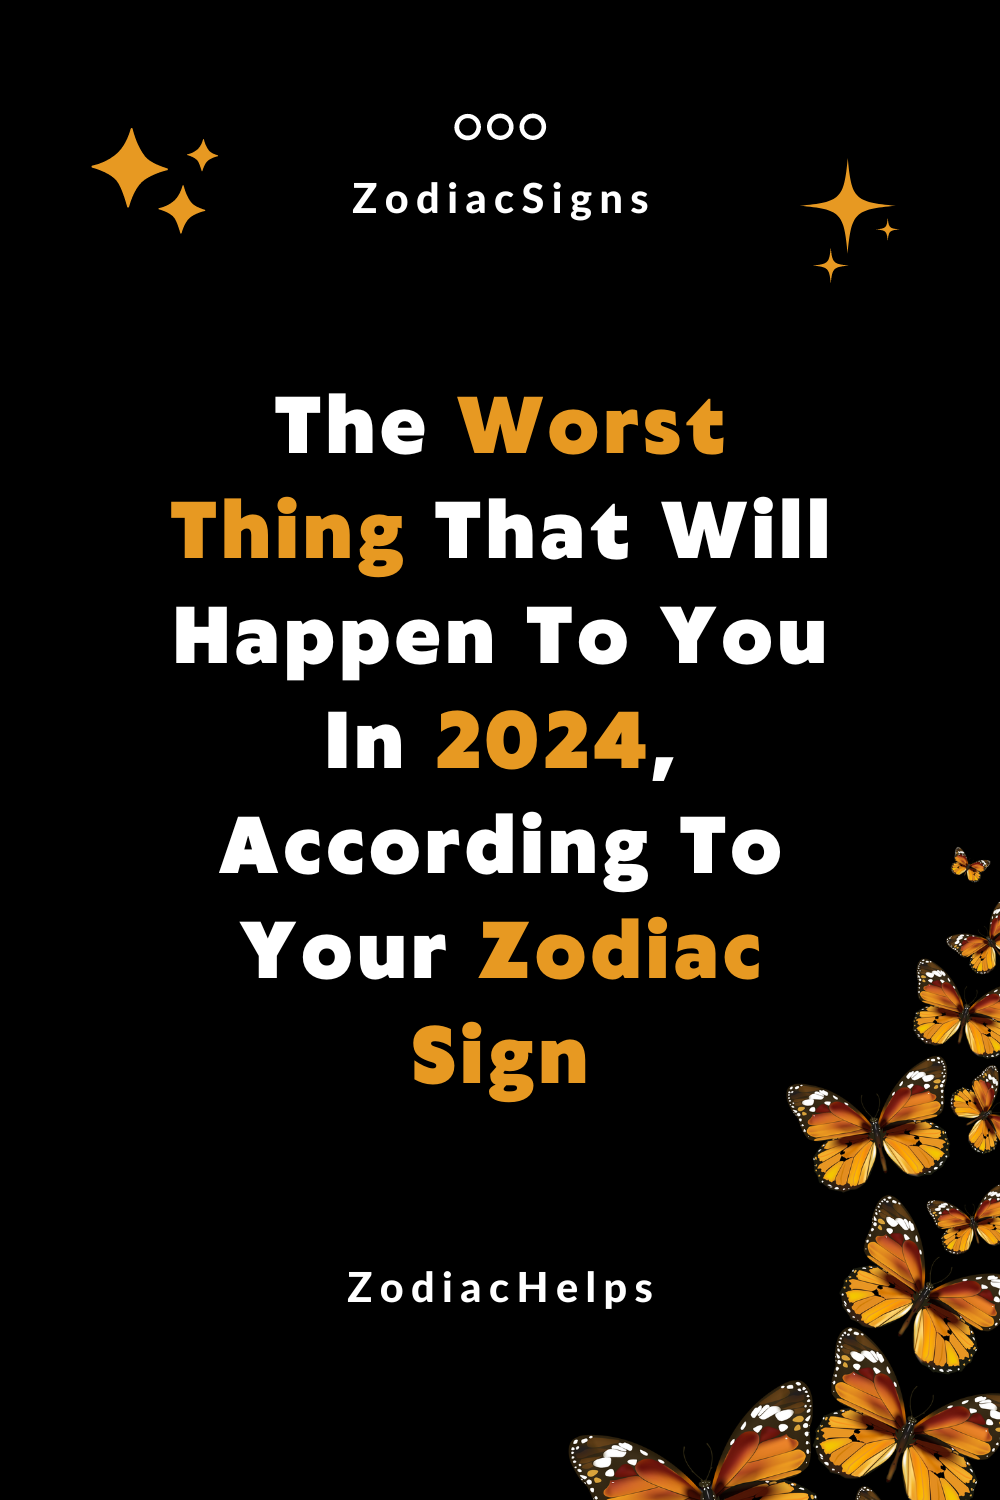 The Worst Thing That Will Happen To You In 2024, According To Your Zodiac Sign